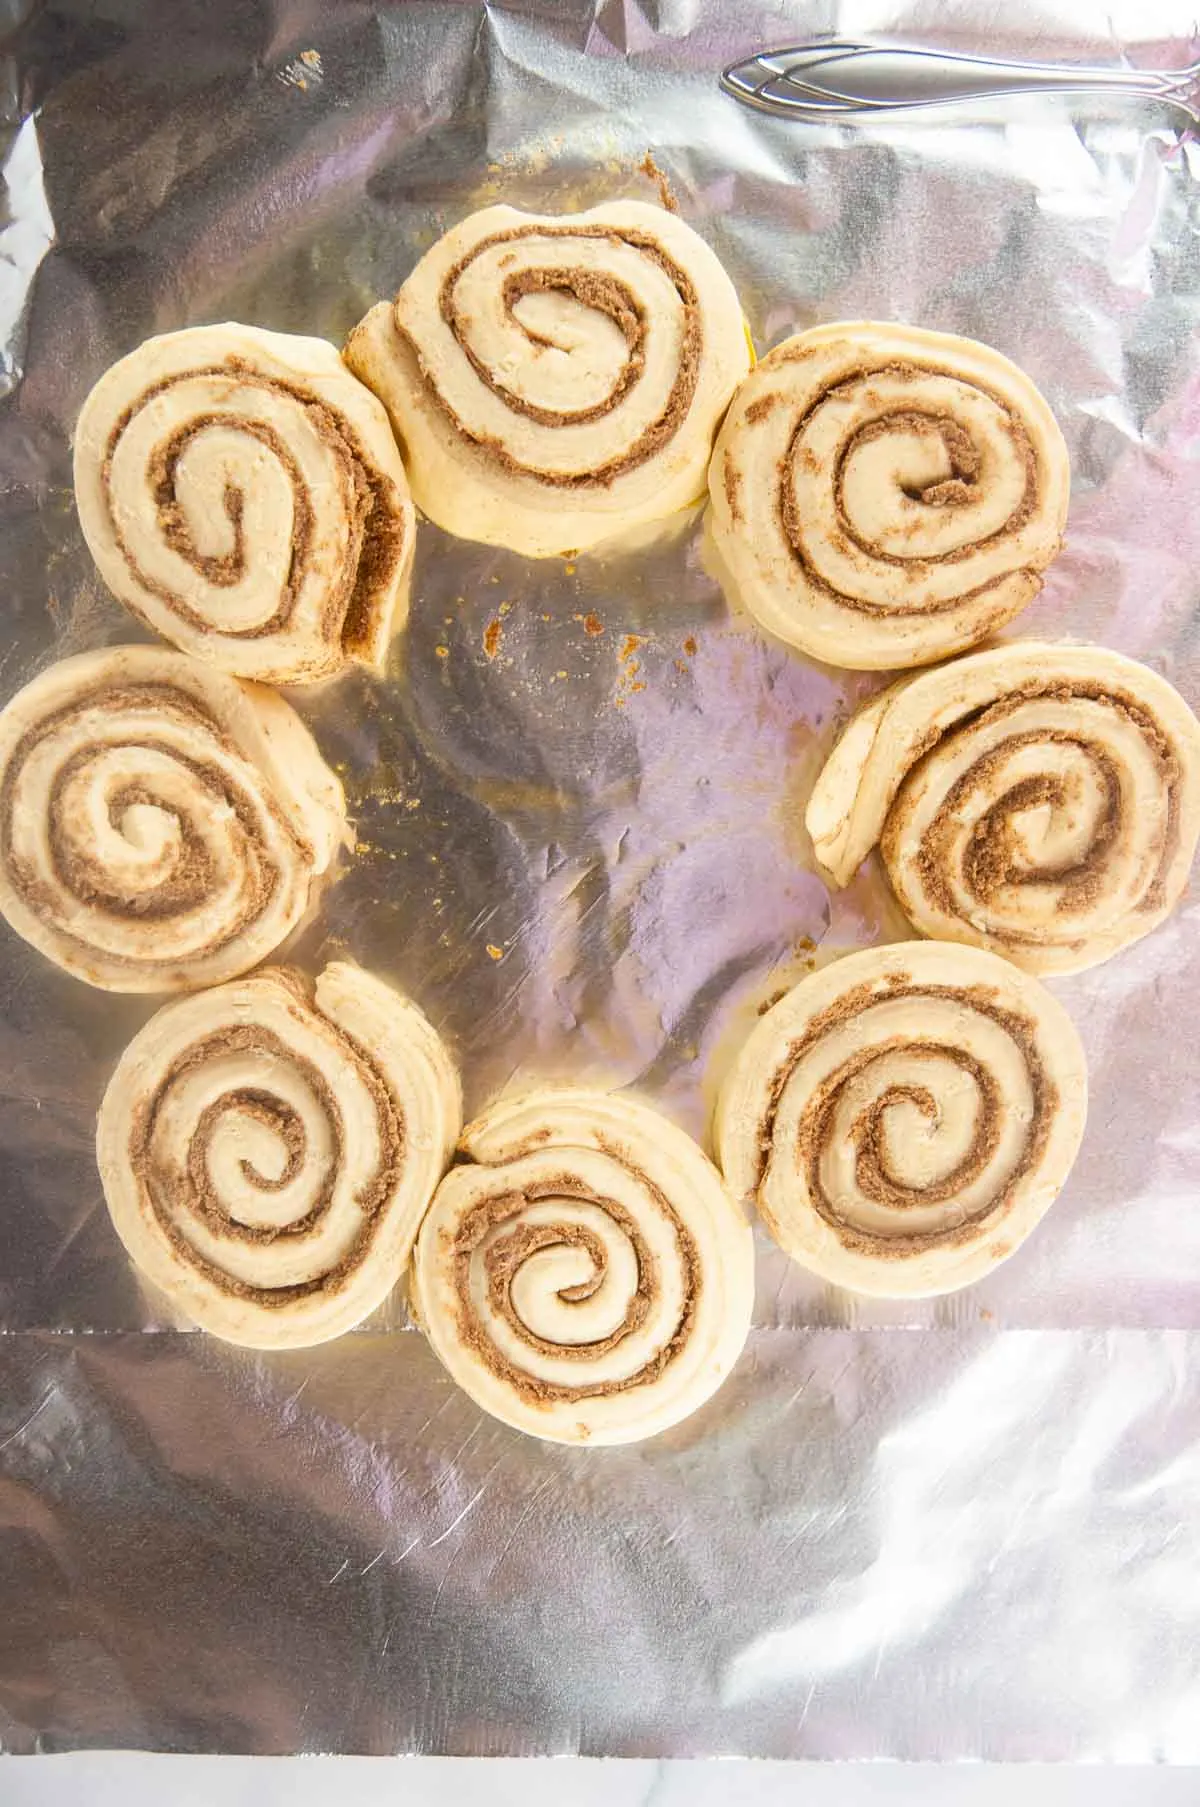 Arrange the cinnamon rolls on a lined baking sheet so they make a hollow circle.